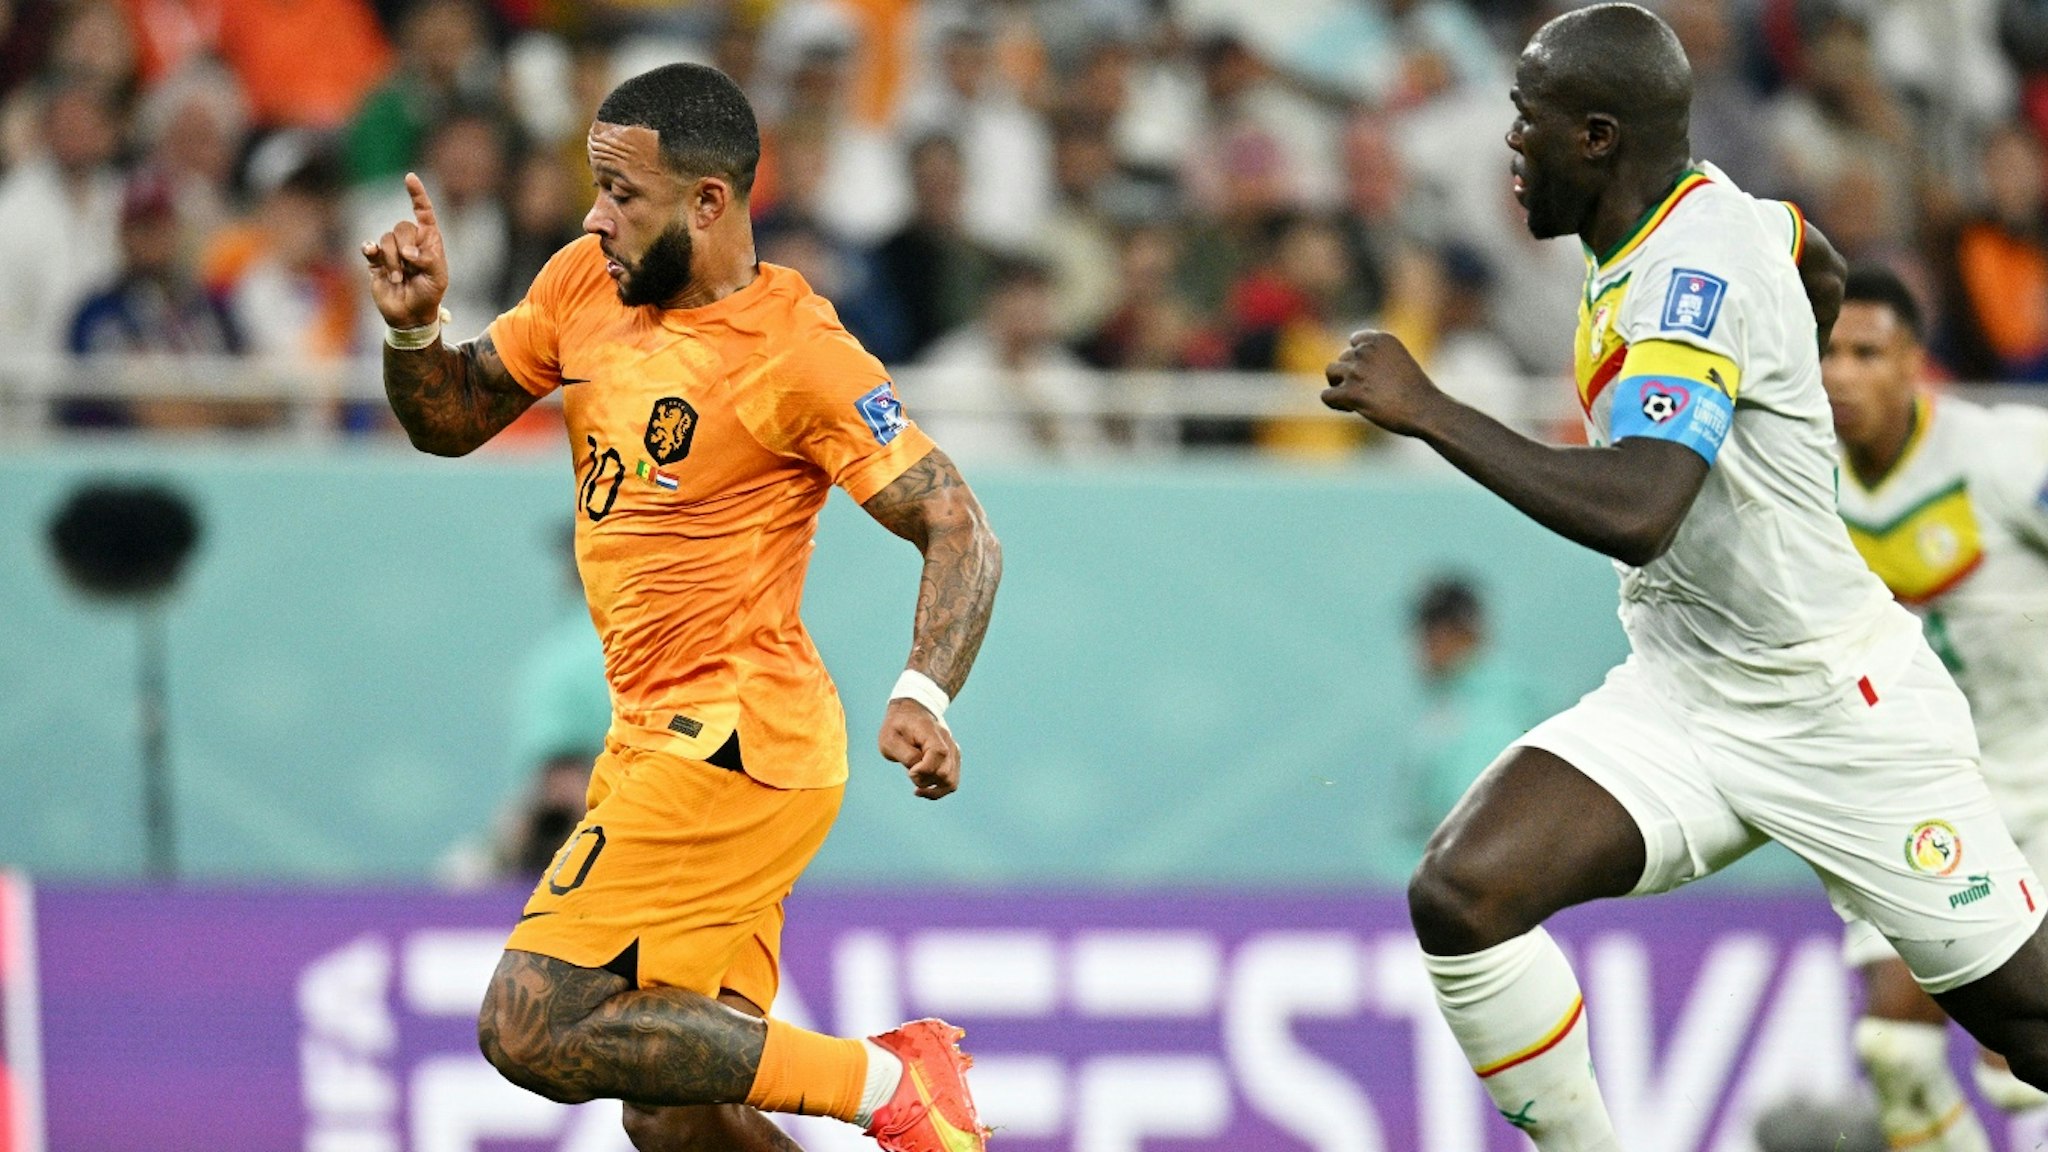 Memphis Depay of Netherlands runs with the ball during the FIFA World Cup Qatar 2022 Group A match between Senegal and Netherlands at Al Thumama Stadium on November 21, 2022 in Doha, Qatar.